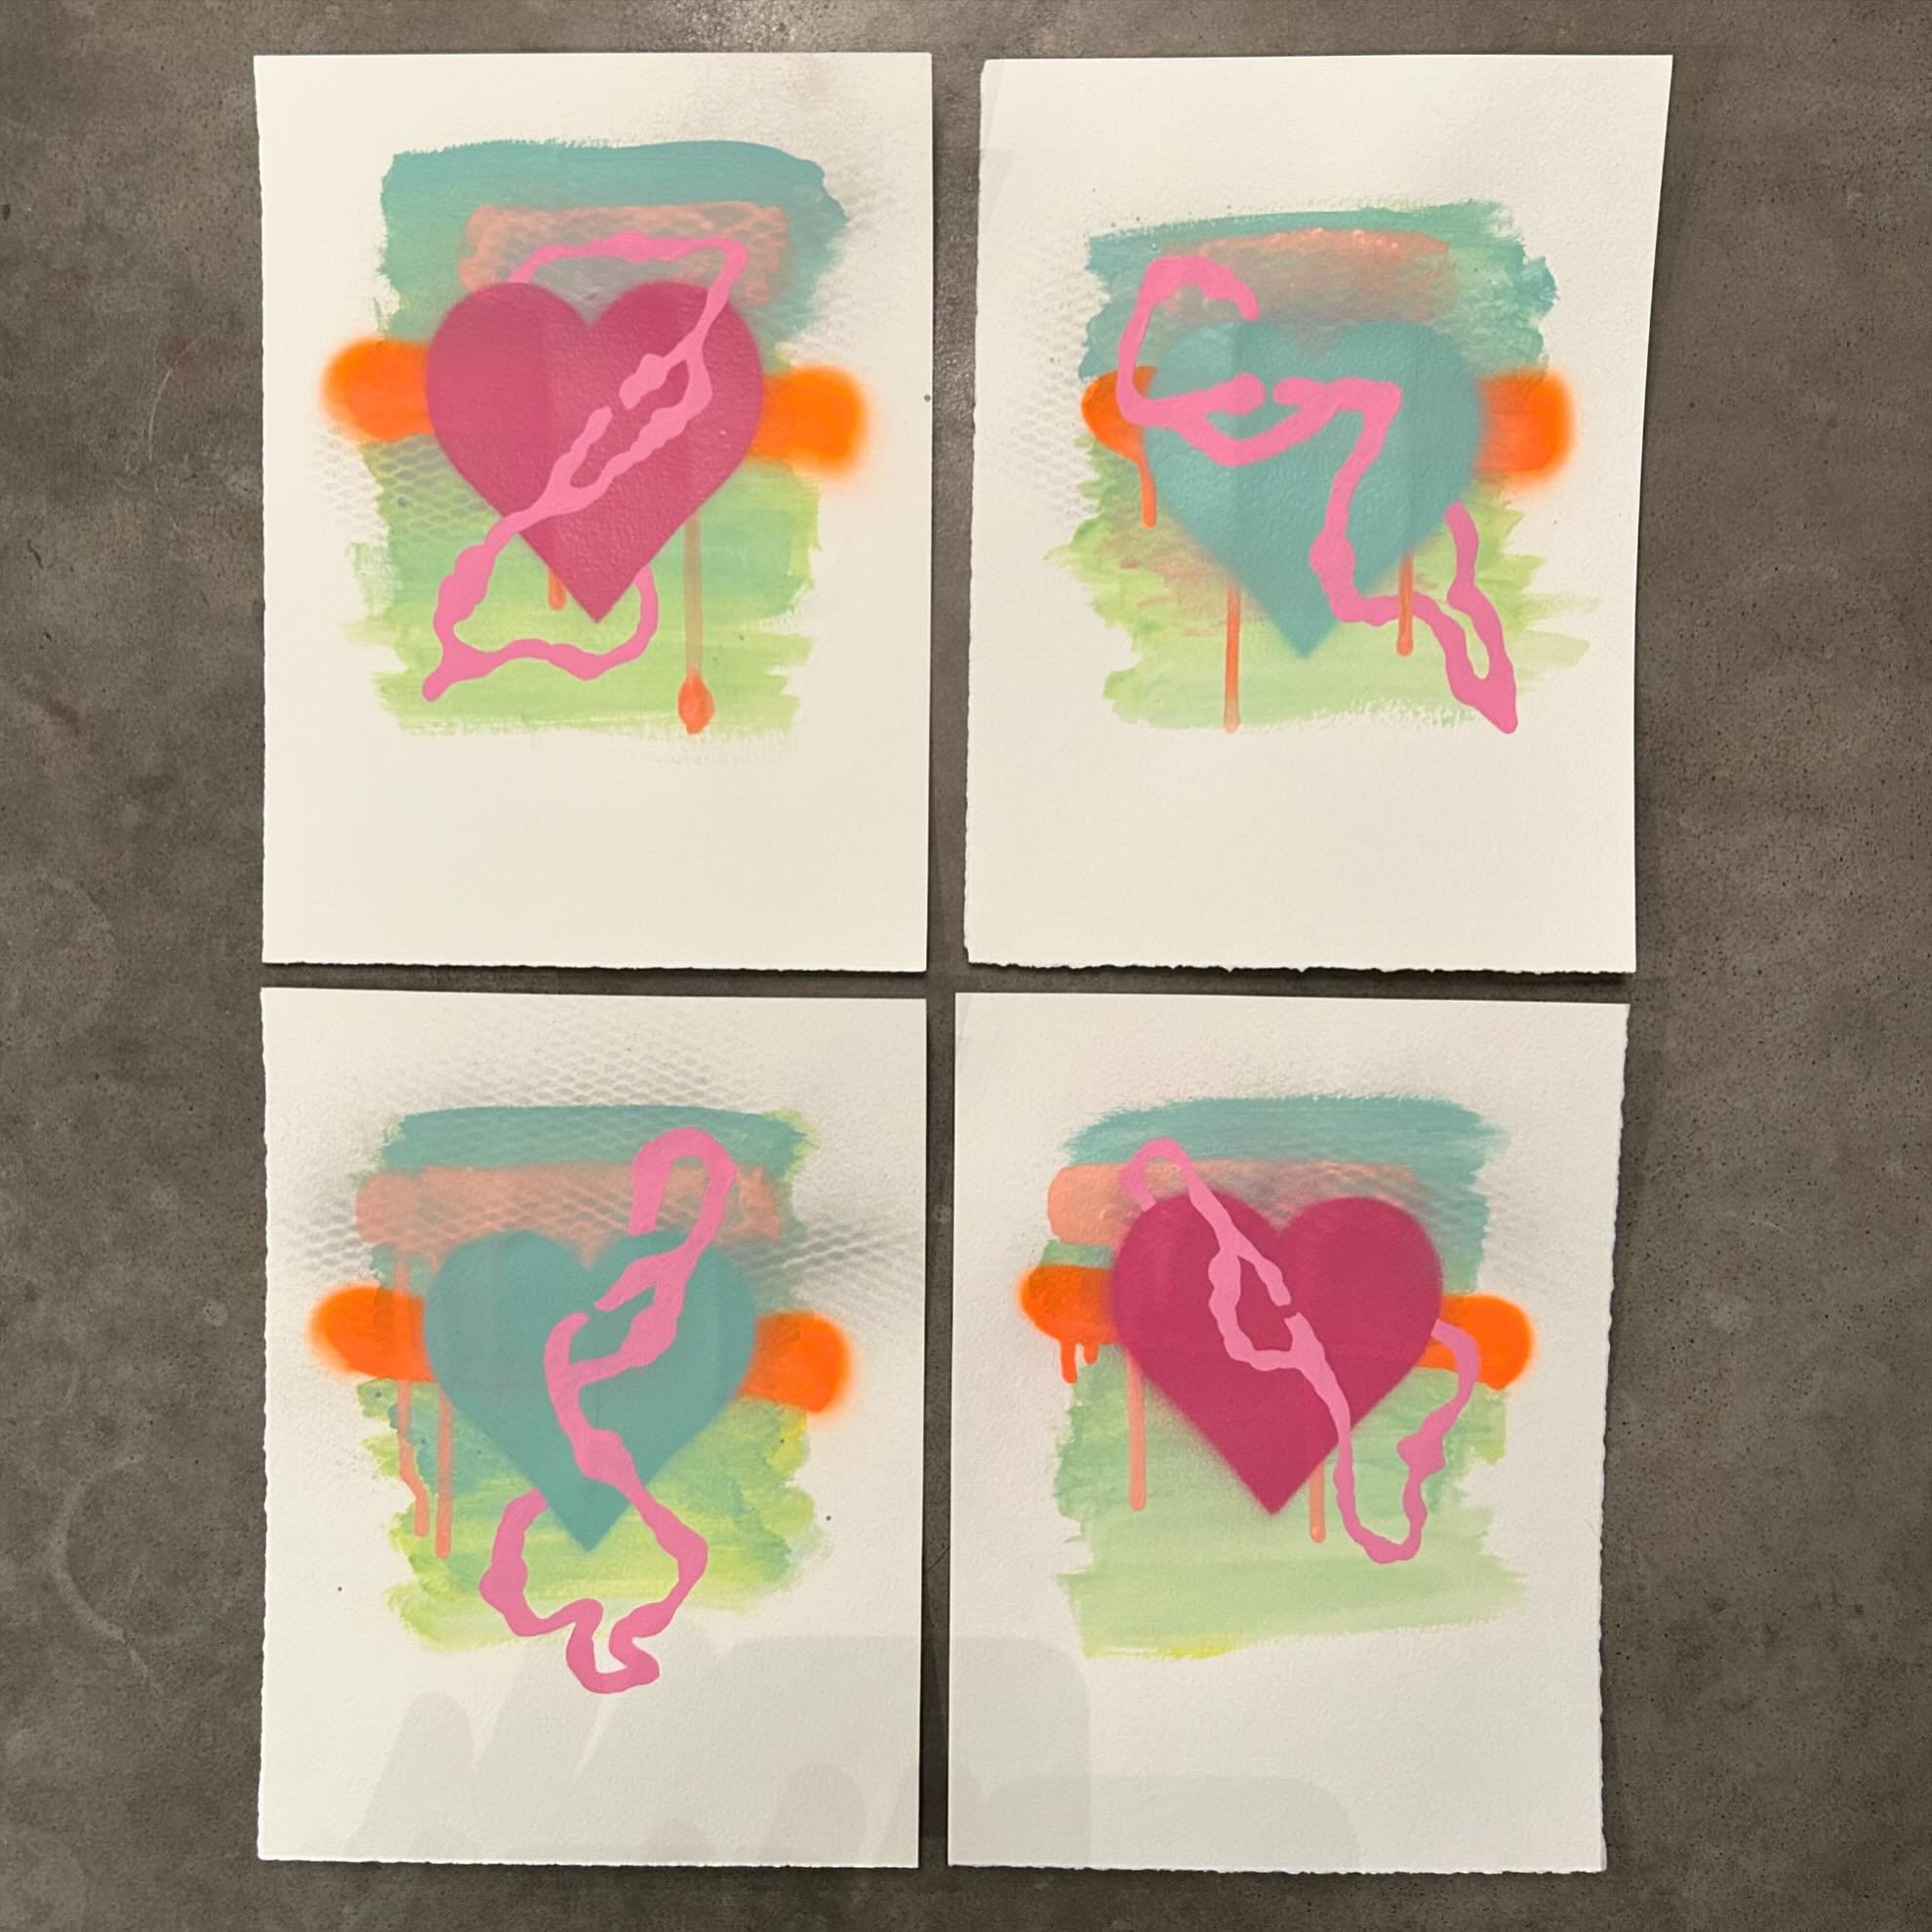 More progress tonight on the &ldquo;100 HEARTS PROJECT&rdquo; Numbers 21-24 in the works. Stay tuned! Acrylic and spray paint on Canson 90lb watercolor paper - 7.5&rdquo; x 10&rdquo; #art #instart #contemporaryart #contemporyartist #chicagoartist #sa